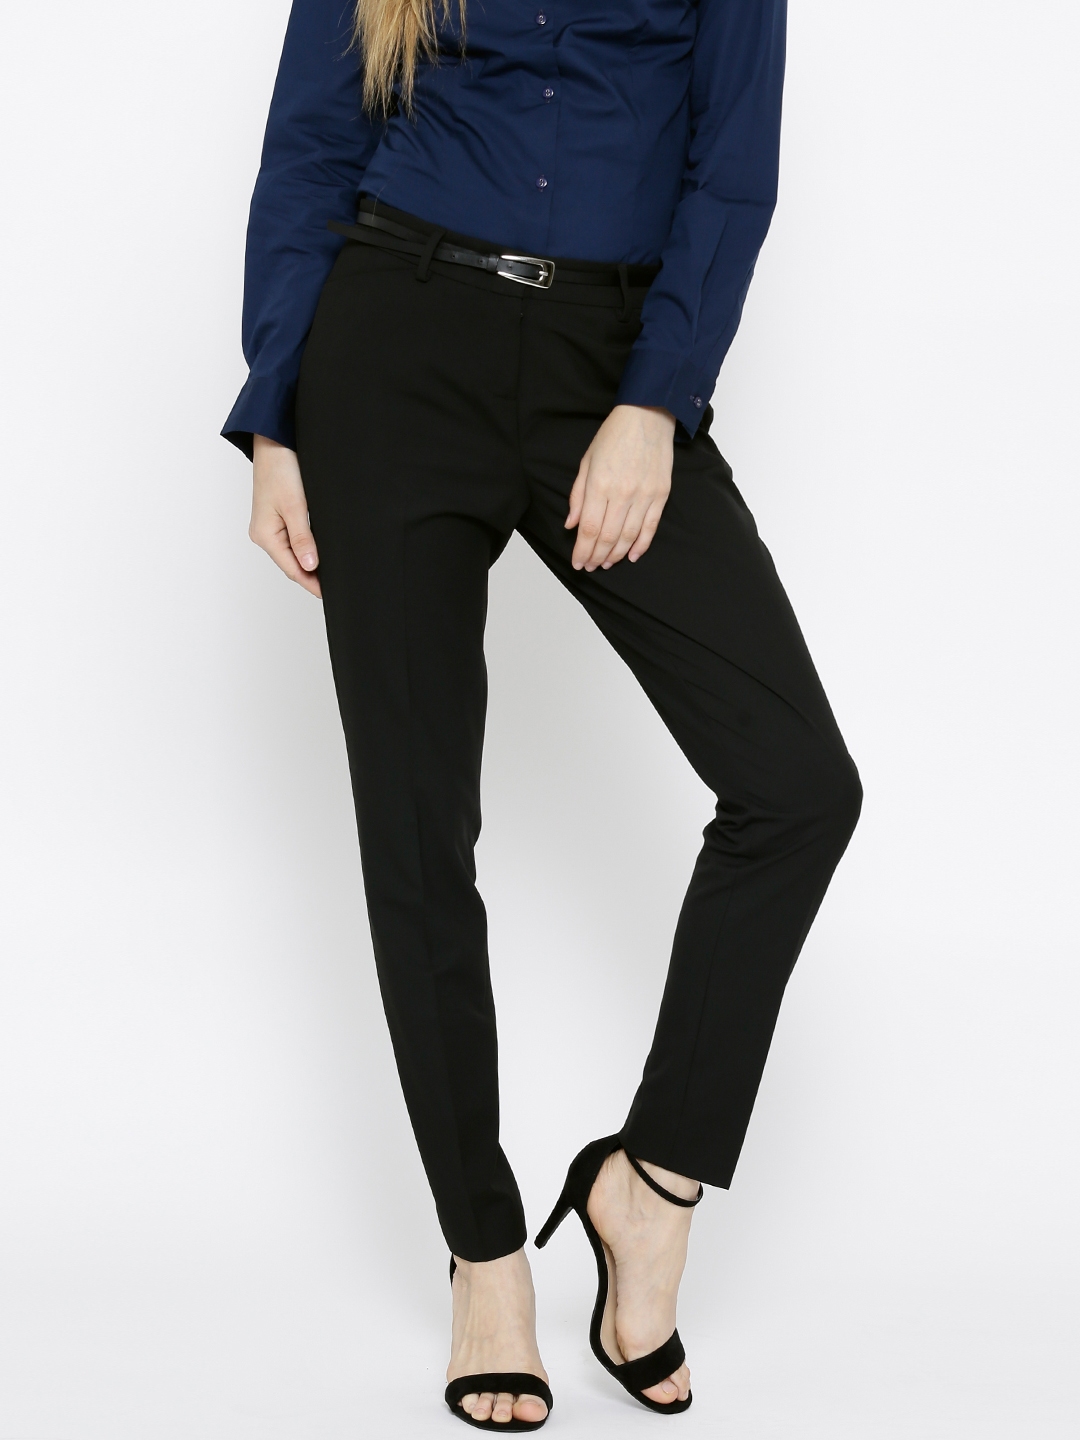 Buy Wills Lifestyle Women Black Slim Fit Flat Front Formal Trousers   Trousers for Women 1047171  Myntra